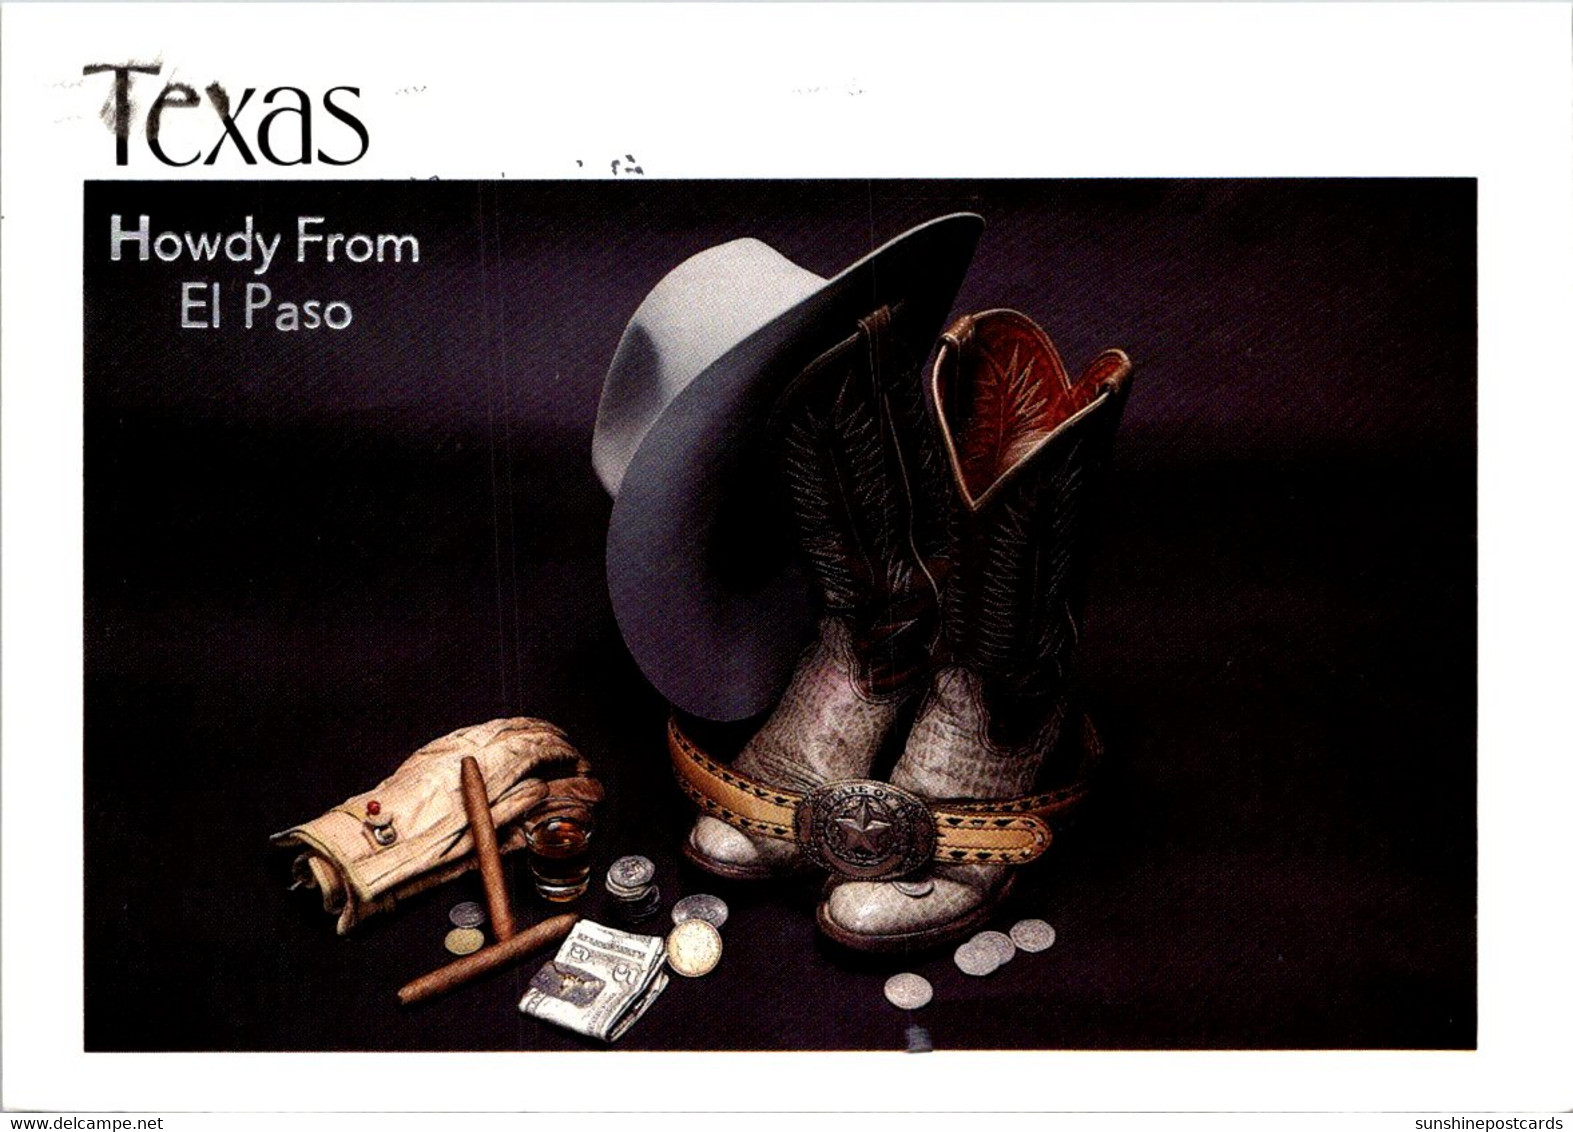 Texas Howdy From El Paso Showing Texas Essentials Hat Boots Beelt Buckle And More 1996 - El Paso